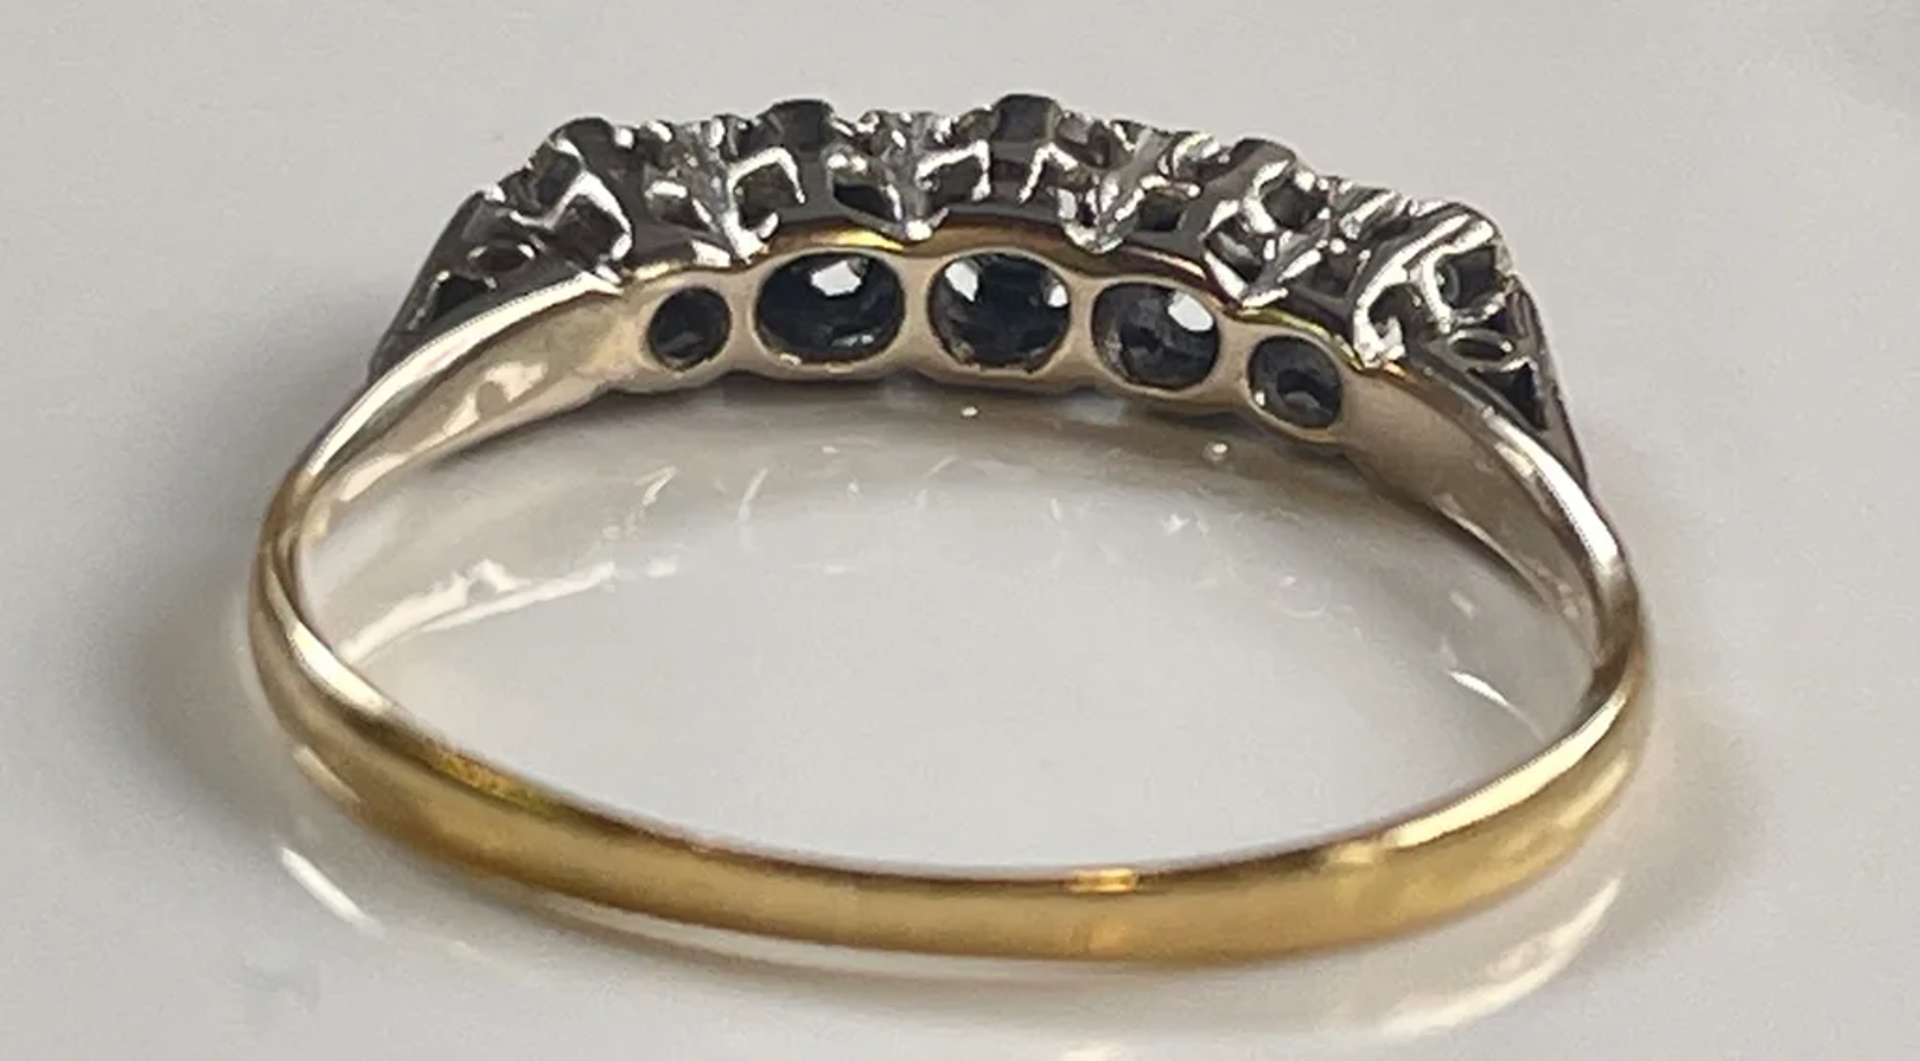 Antique 18K Gold + Platinum Ring with 5 Old Cut Diamonds - Image 3 of 3